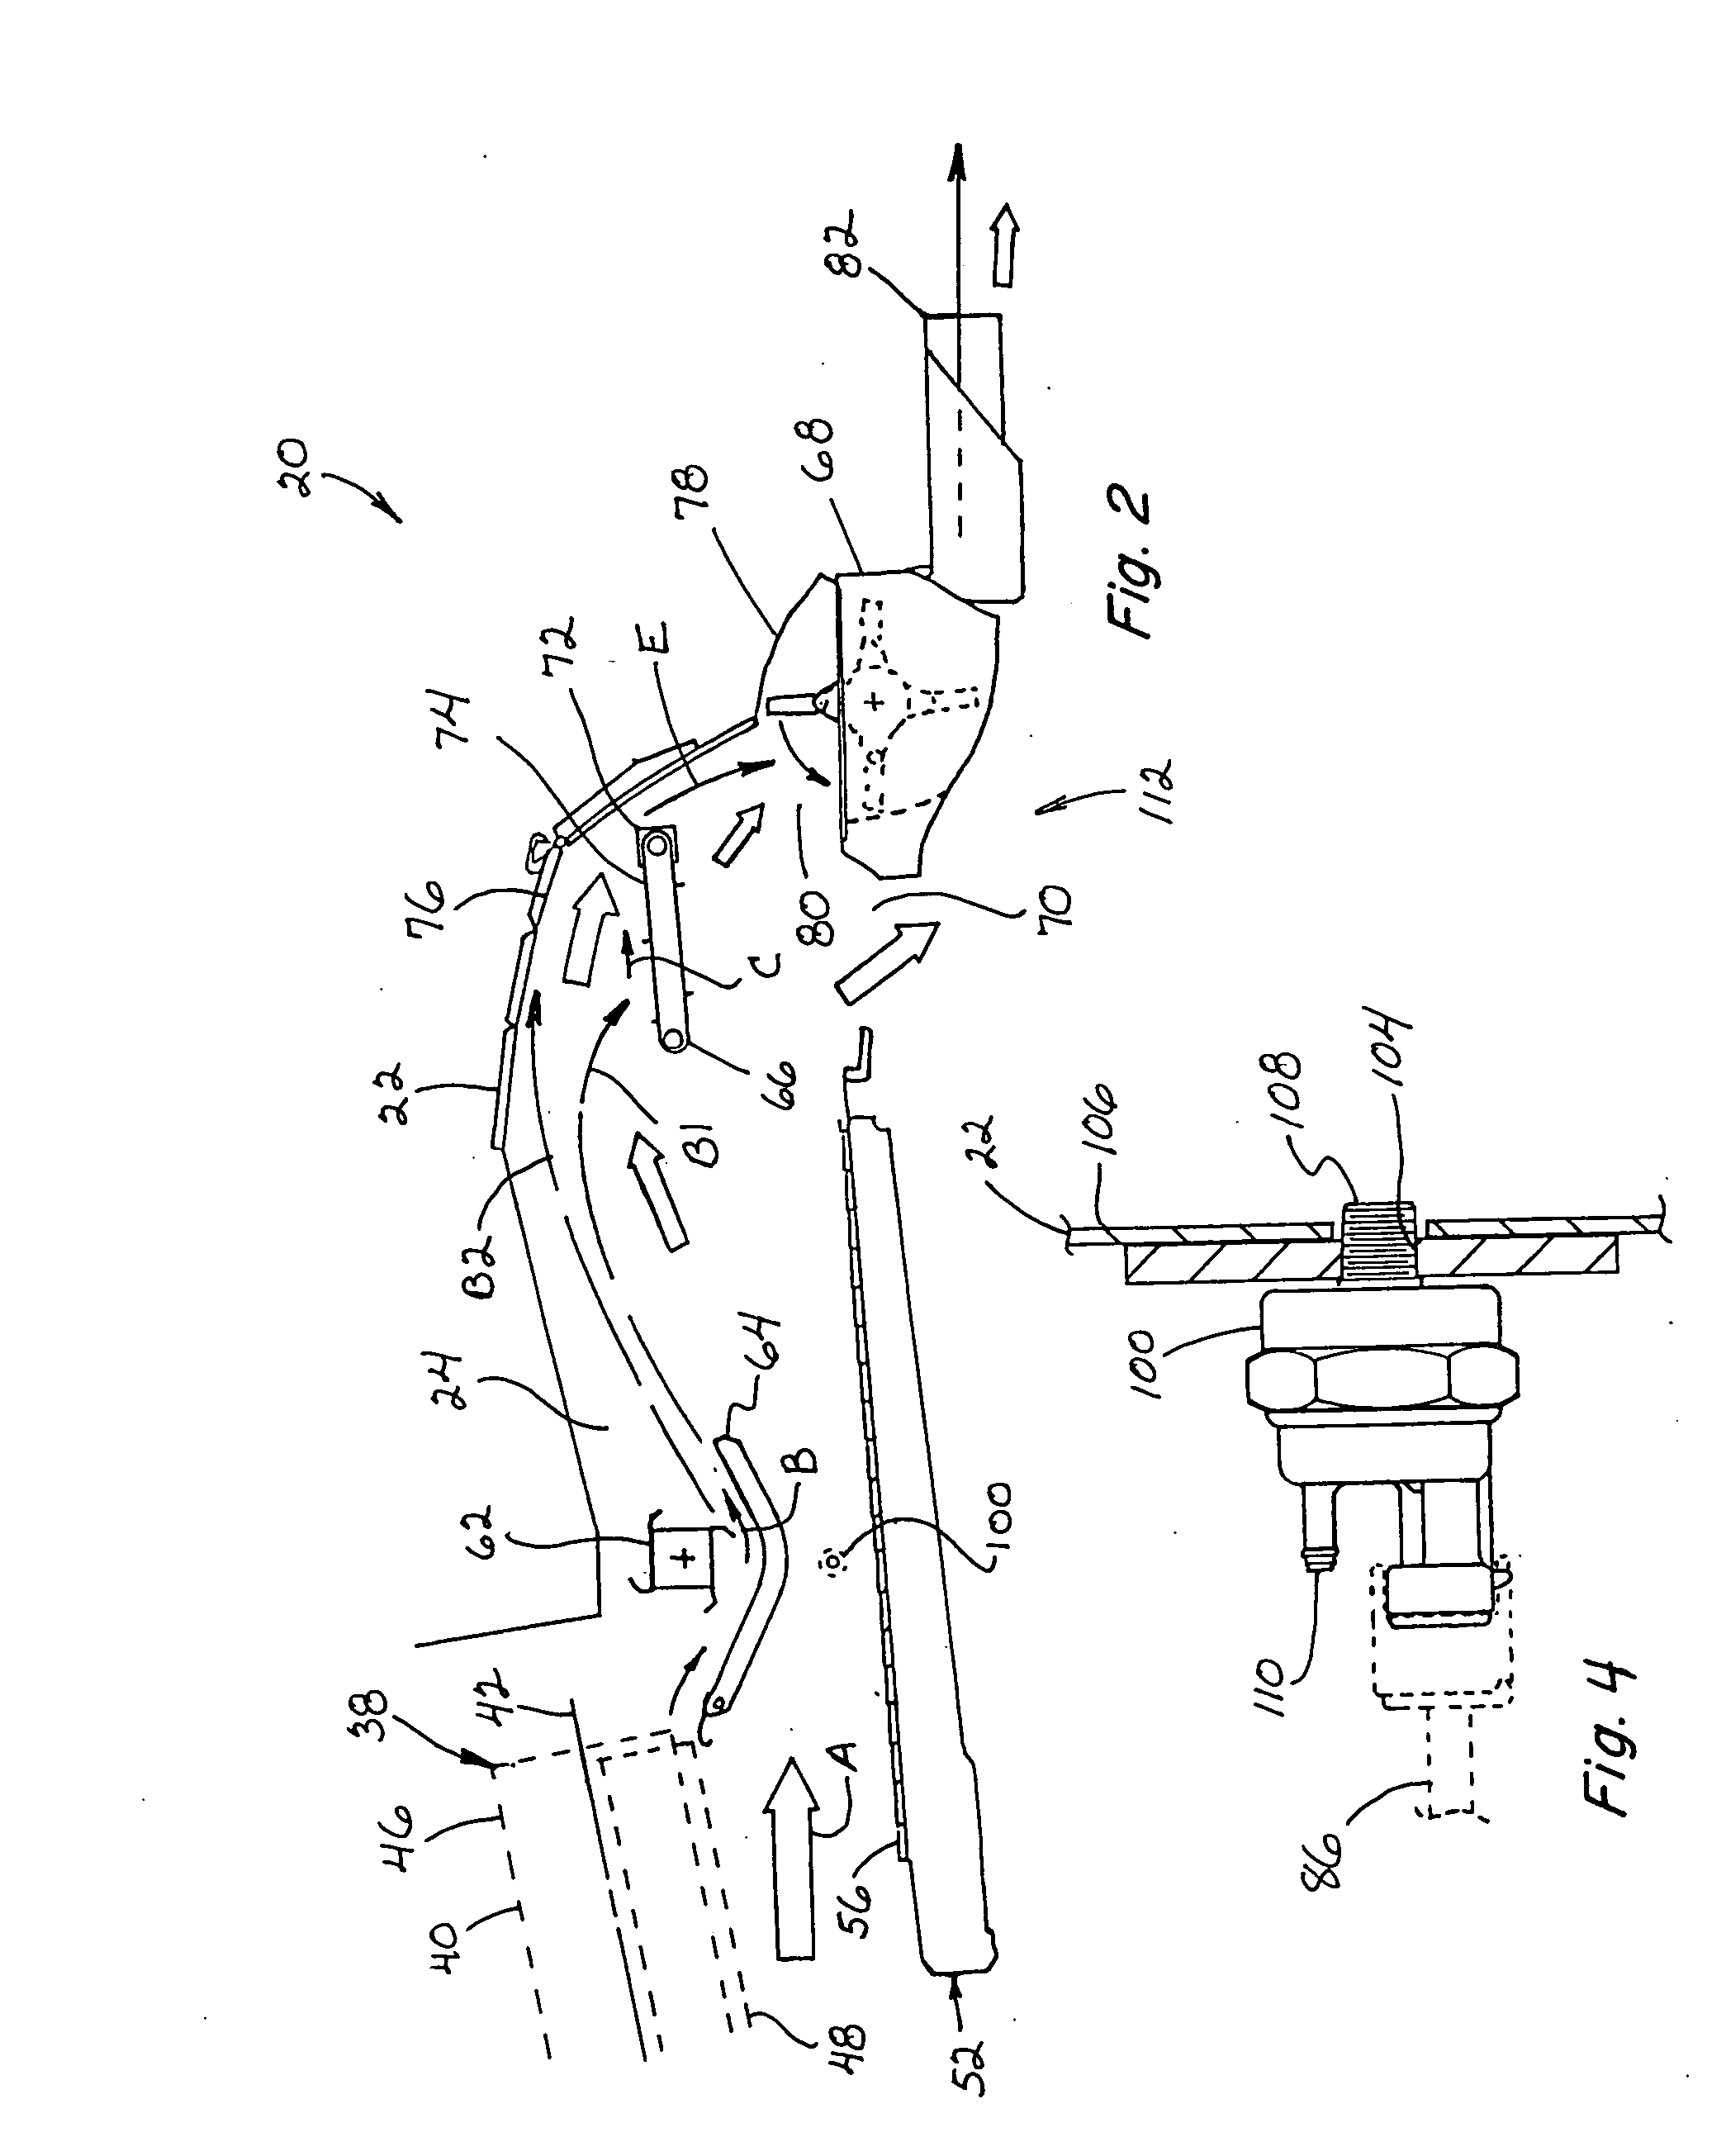 System and method for detecting a condition indicative of plugging of a discharge path of an agricultural combine